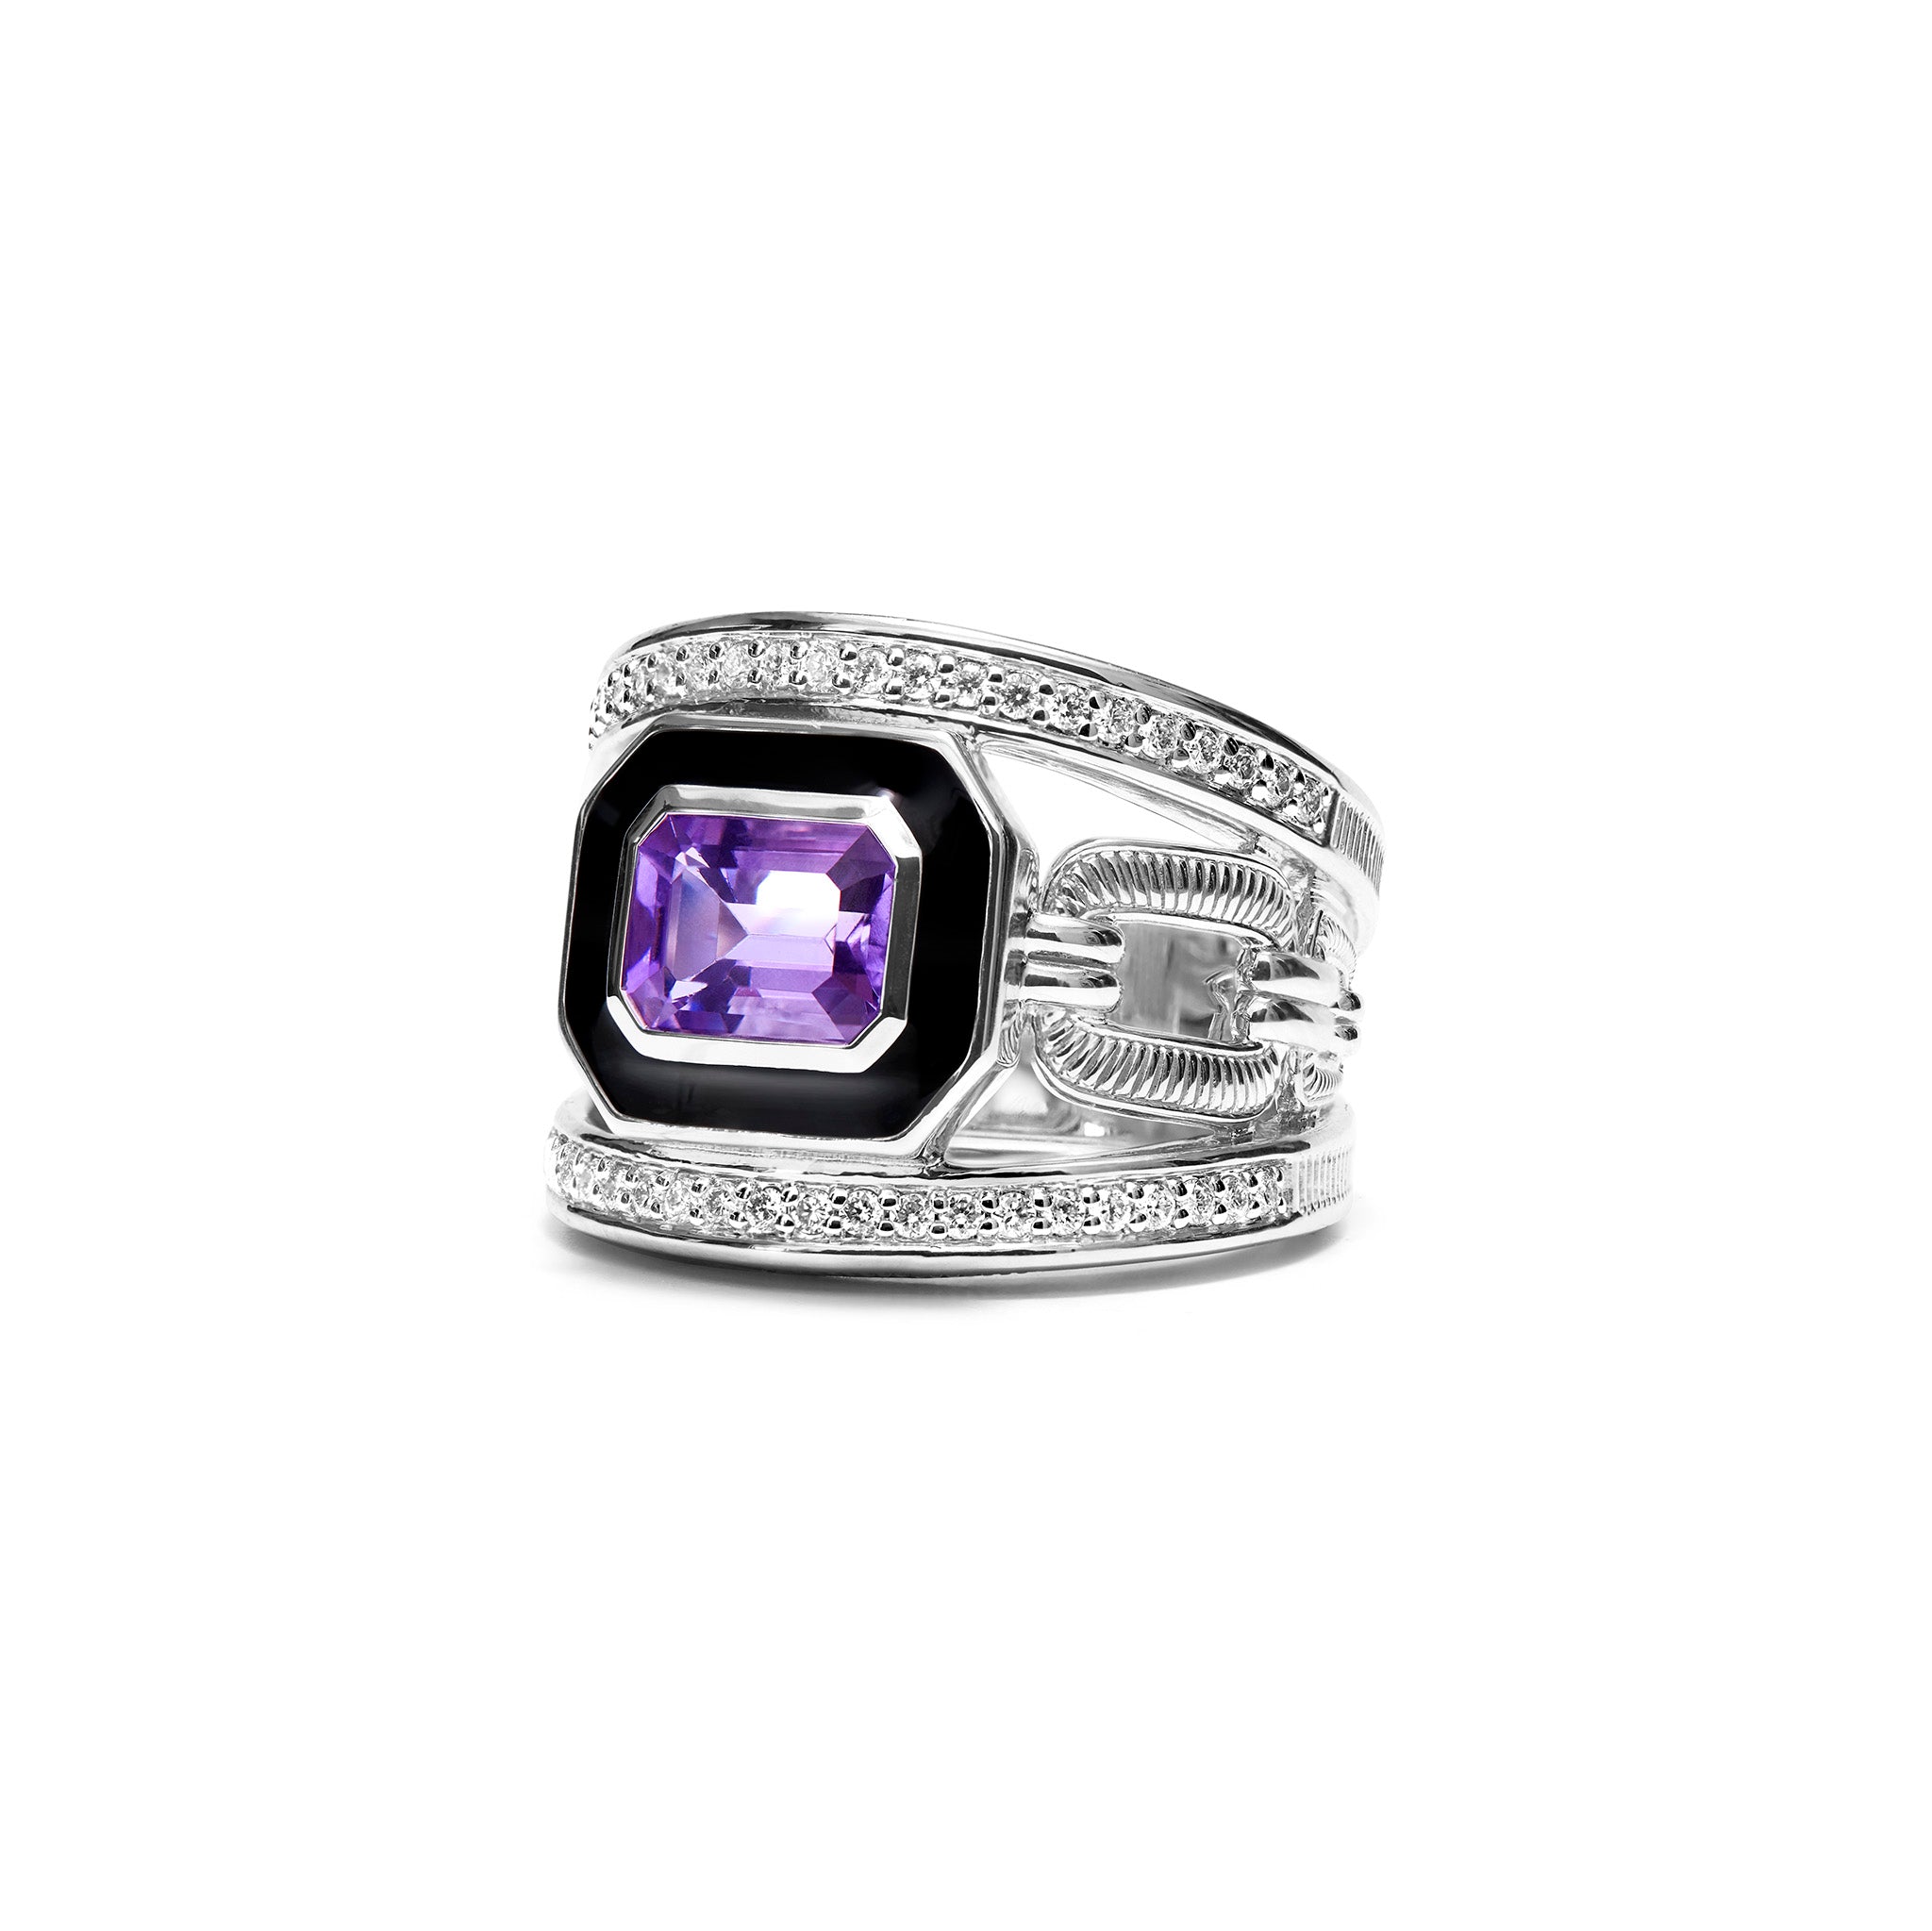 Adrienne Band Ring with Enamel, Amethyst and Diamonds